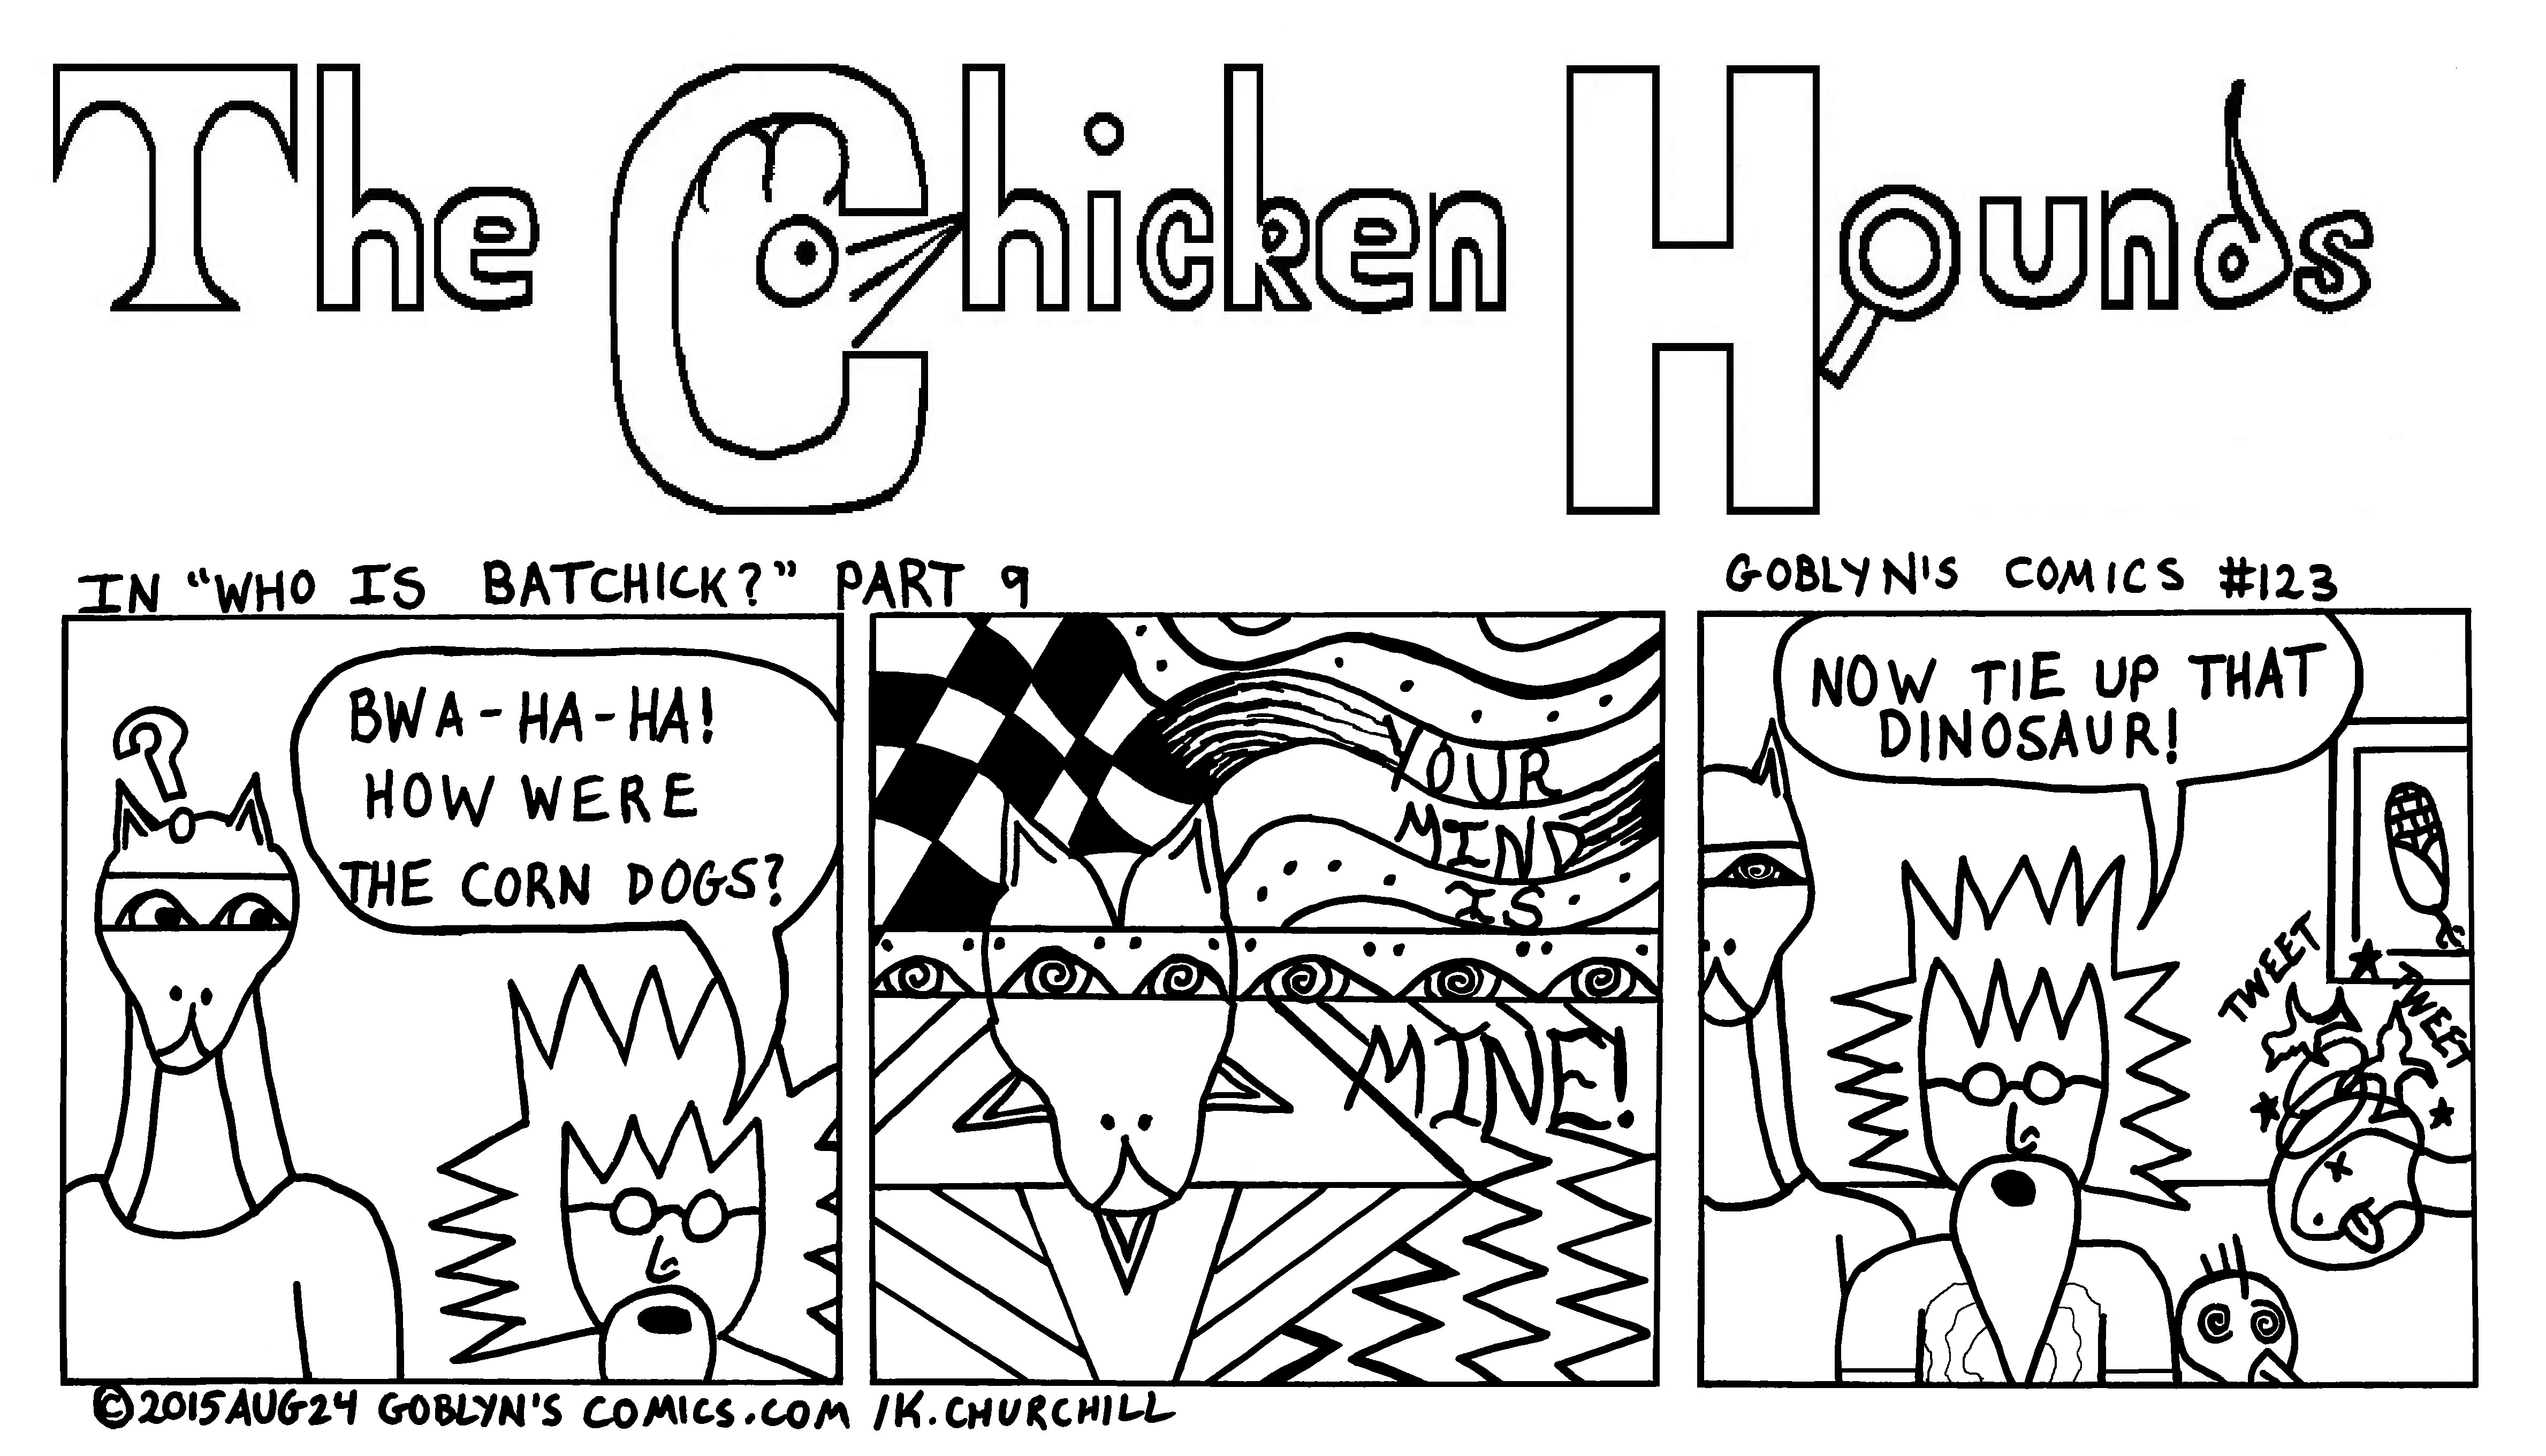 Chicken Hounds "Who is BatChick?" part 9